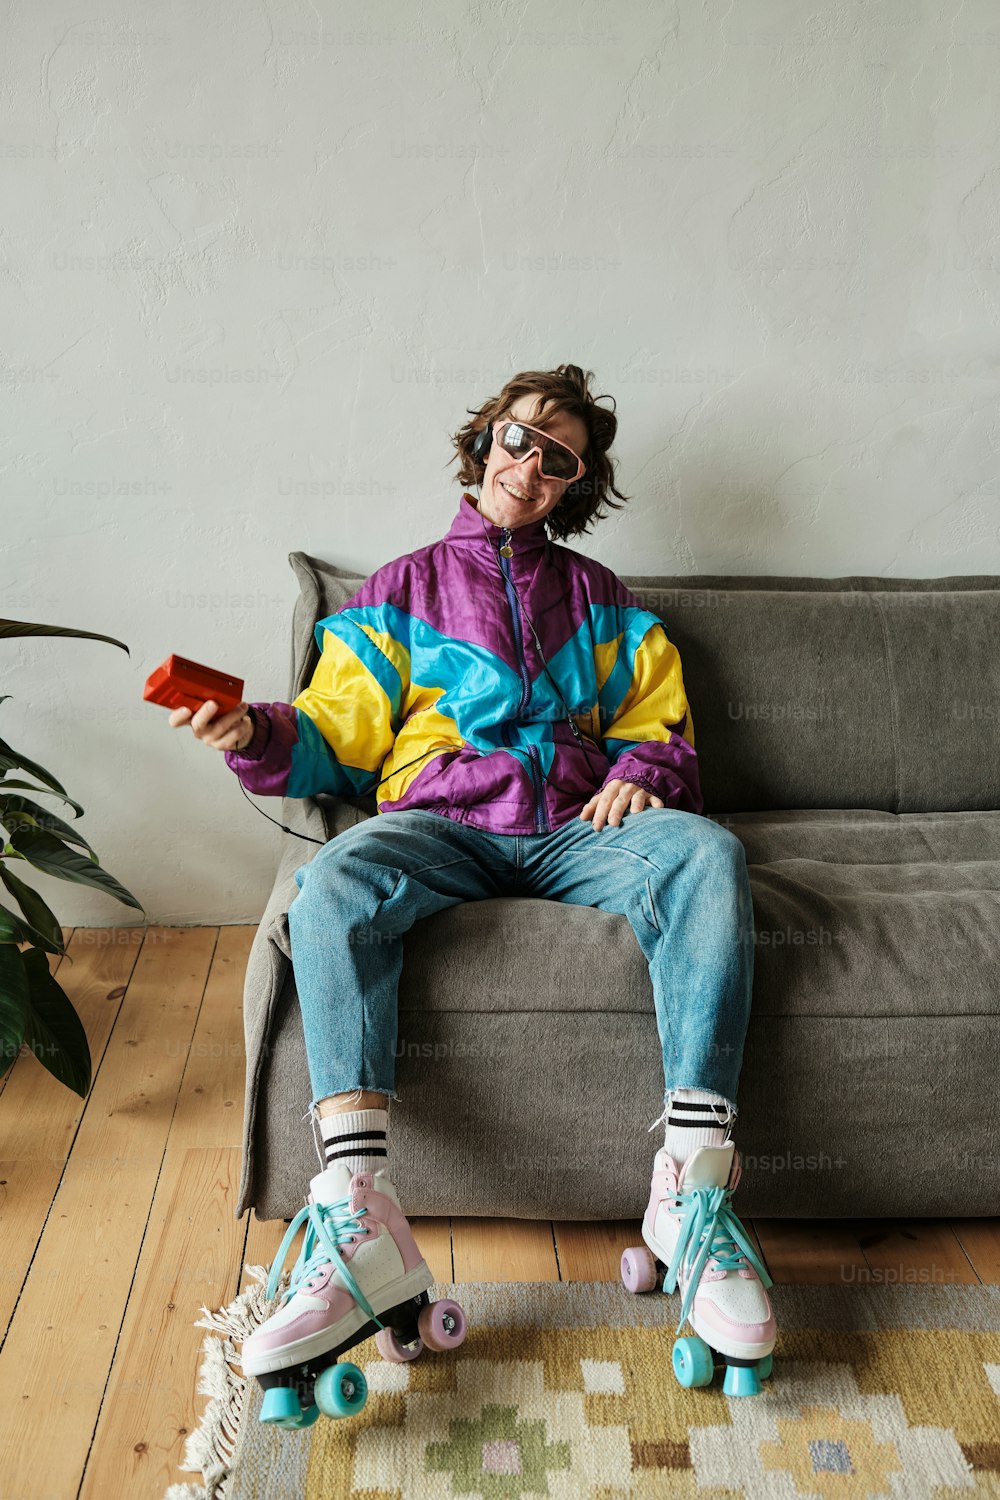 a person sitting on a couch with roller skates